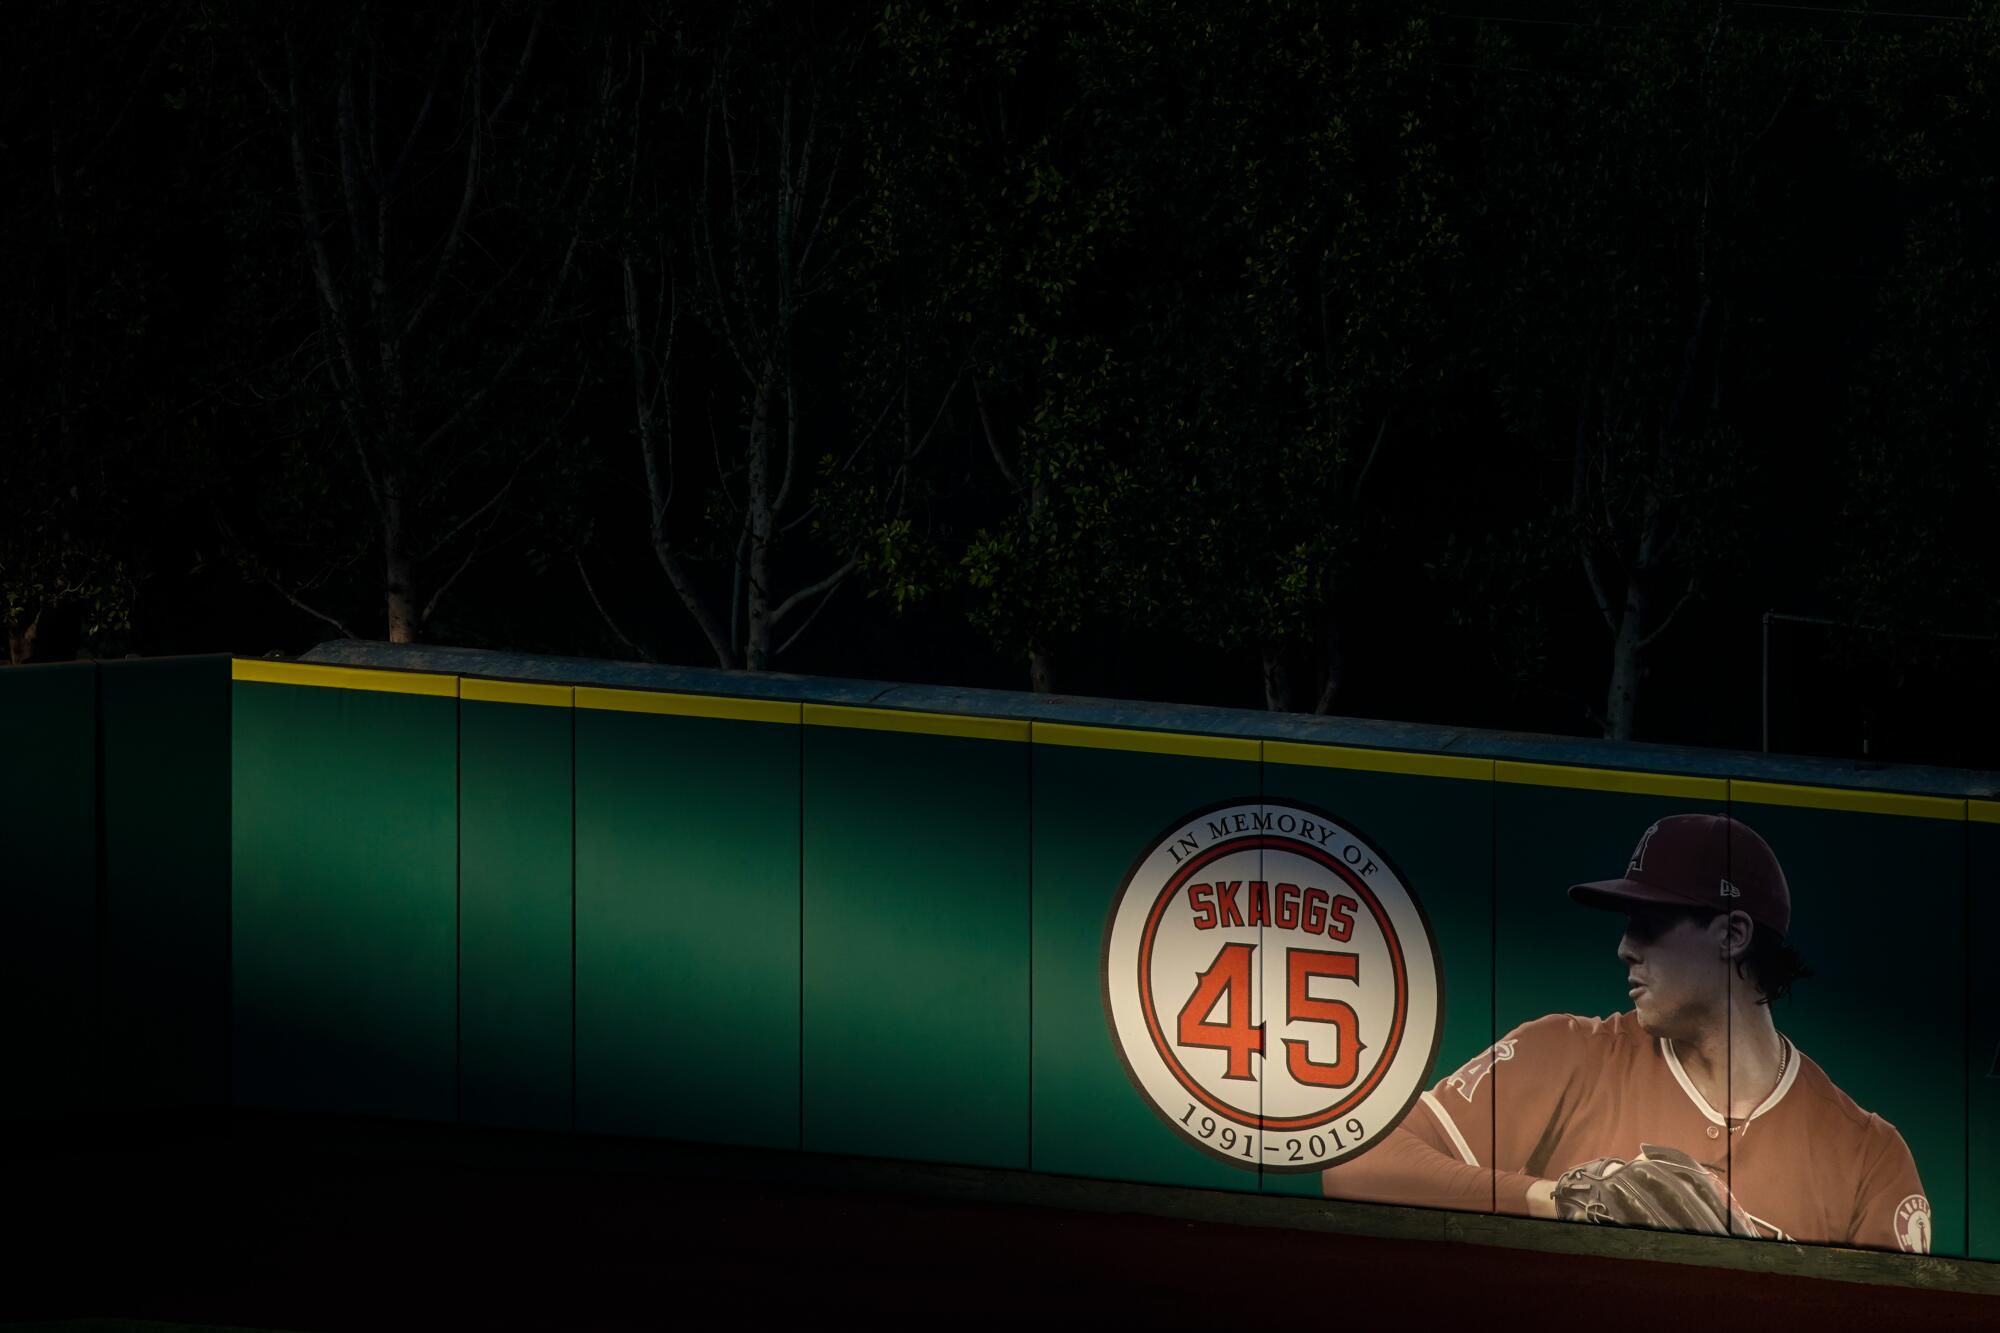 A ray of light is cast sidelong against a green outfield wall with a profile shot of Tyler Skaggs beside his name and number